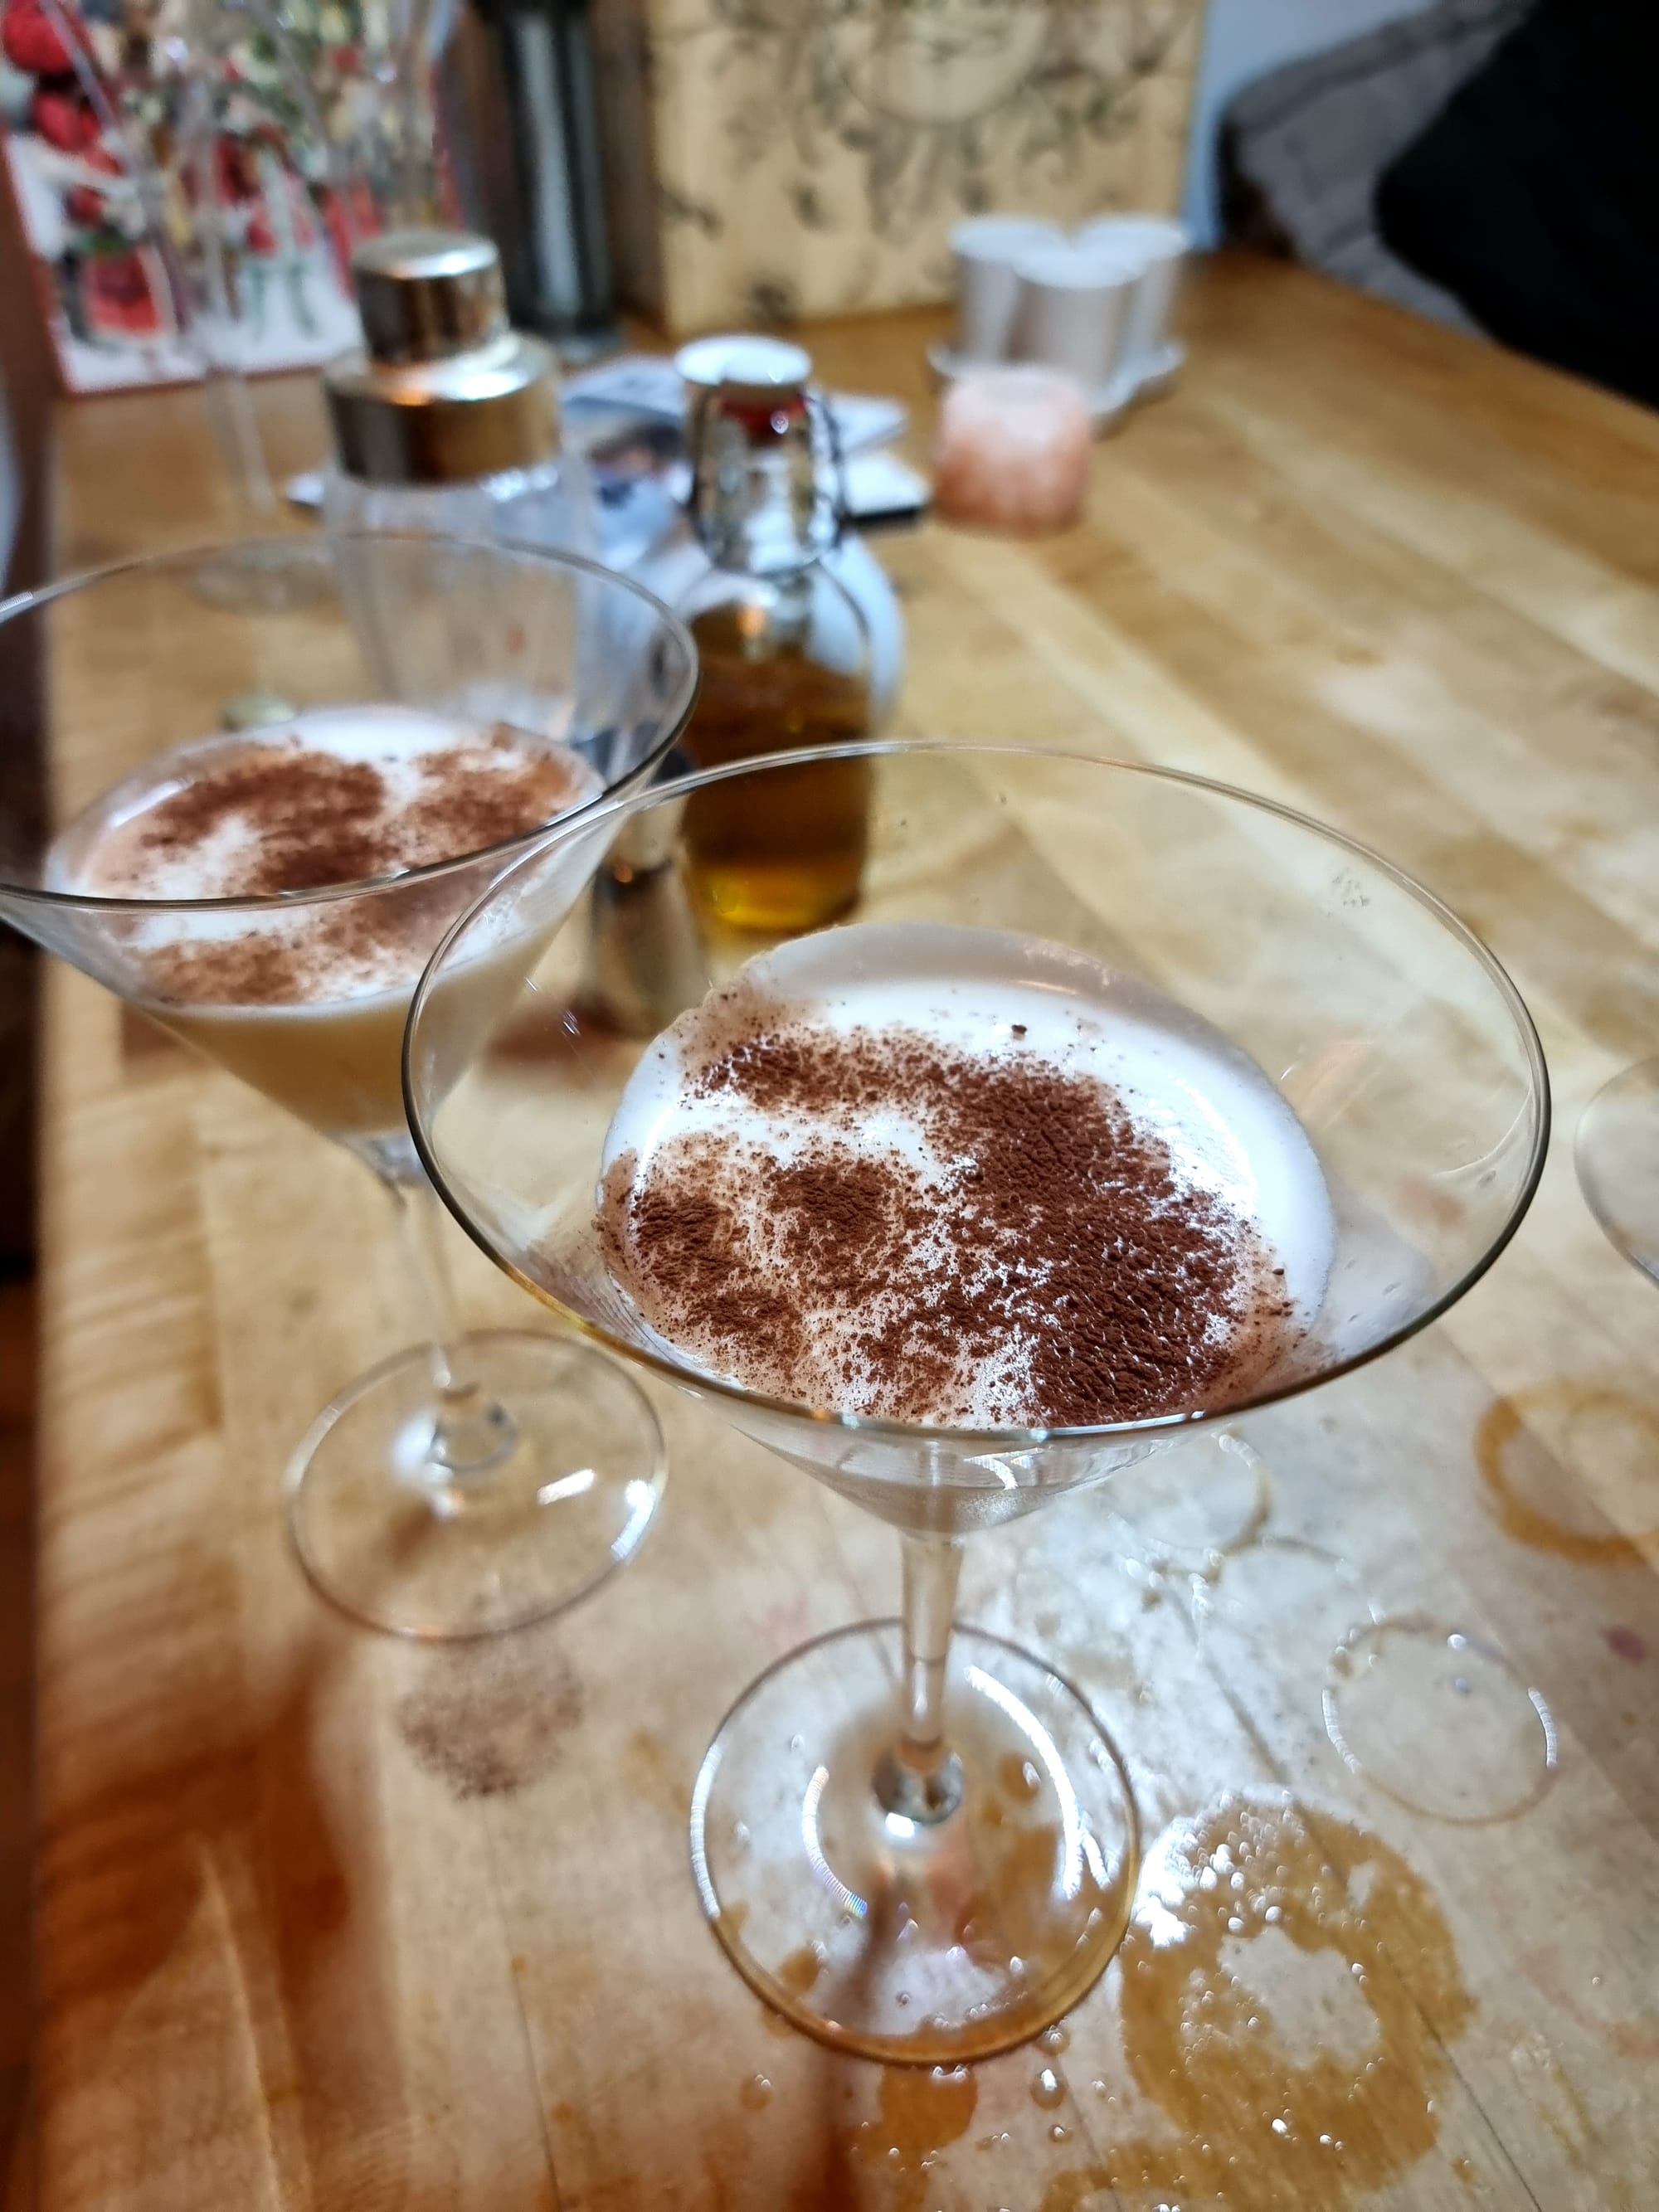 Two Martini glasses, from above. White liquid, powdered brown cocoa powder on top. On a wooden table that's showing signs of many previous cocktails.